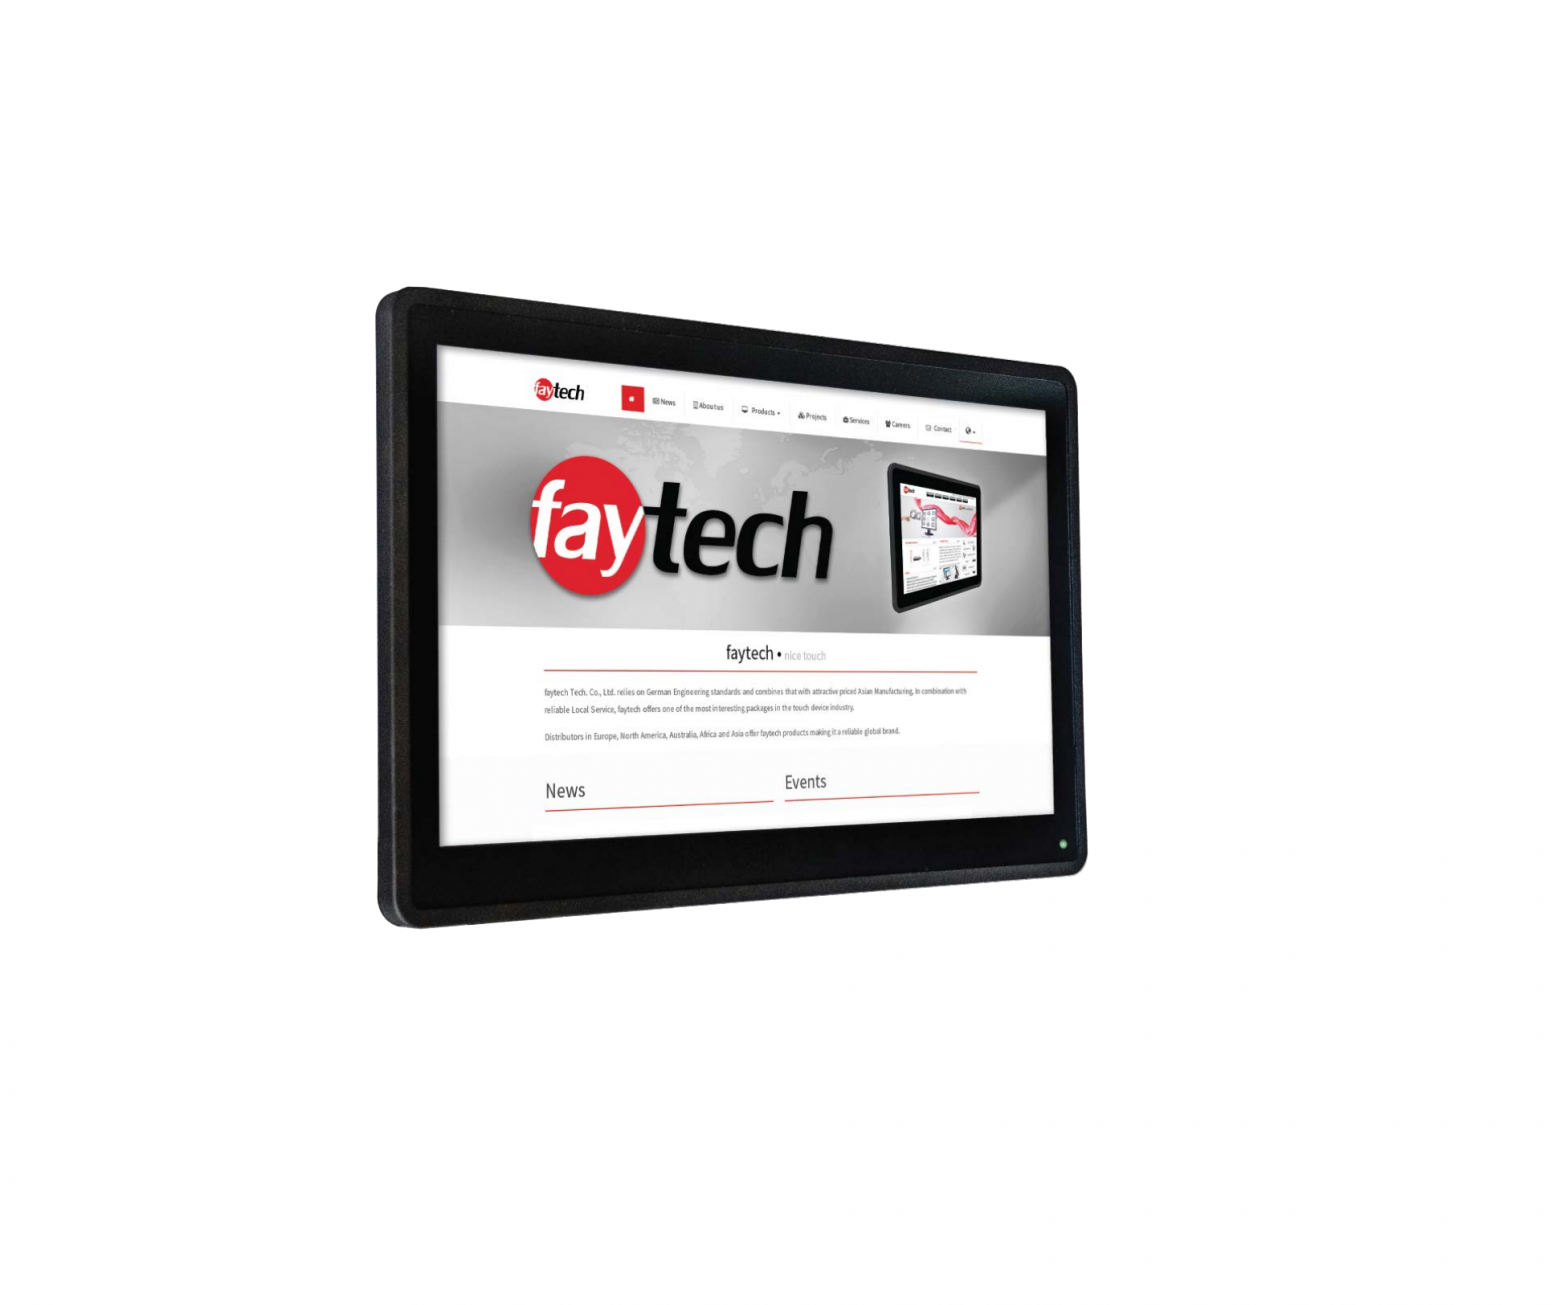 faytech Capacitive Touch PC User Guide